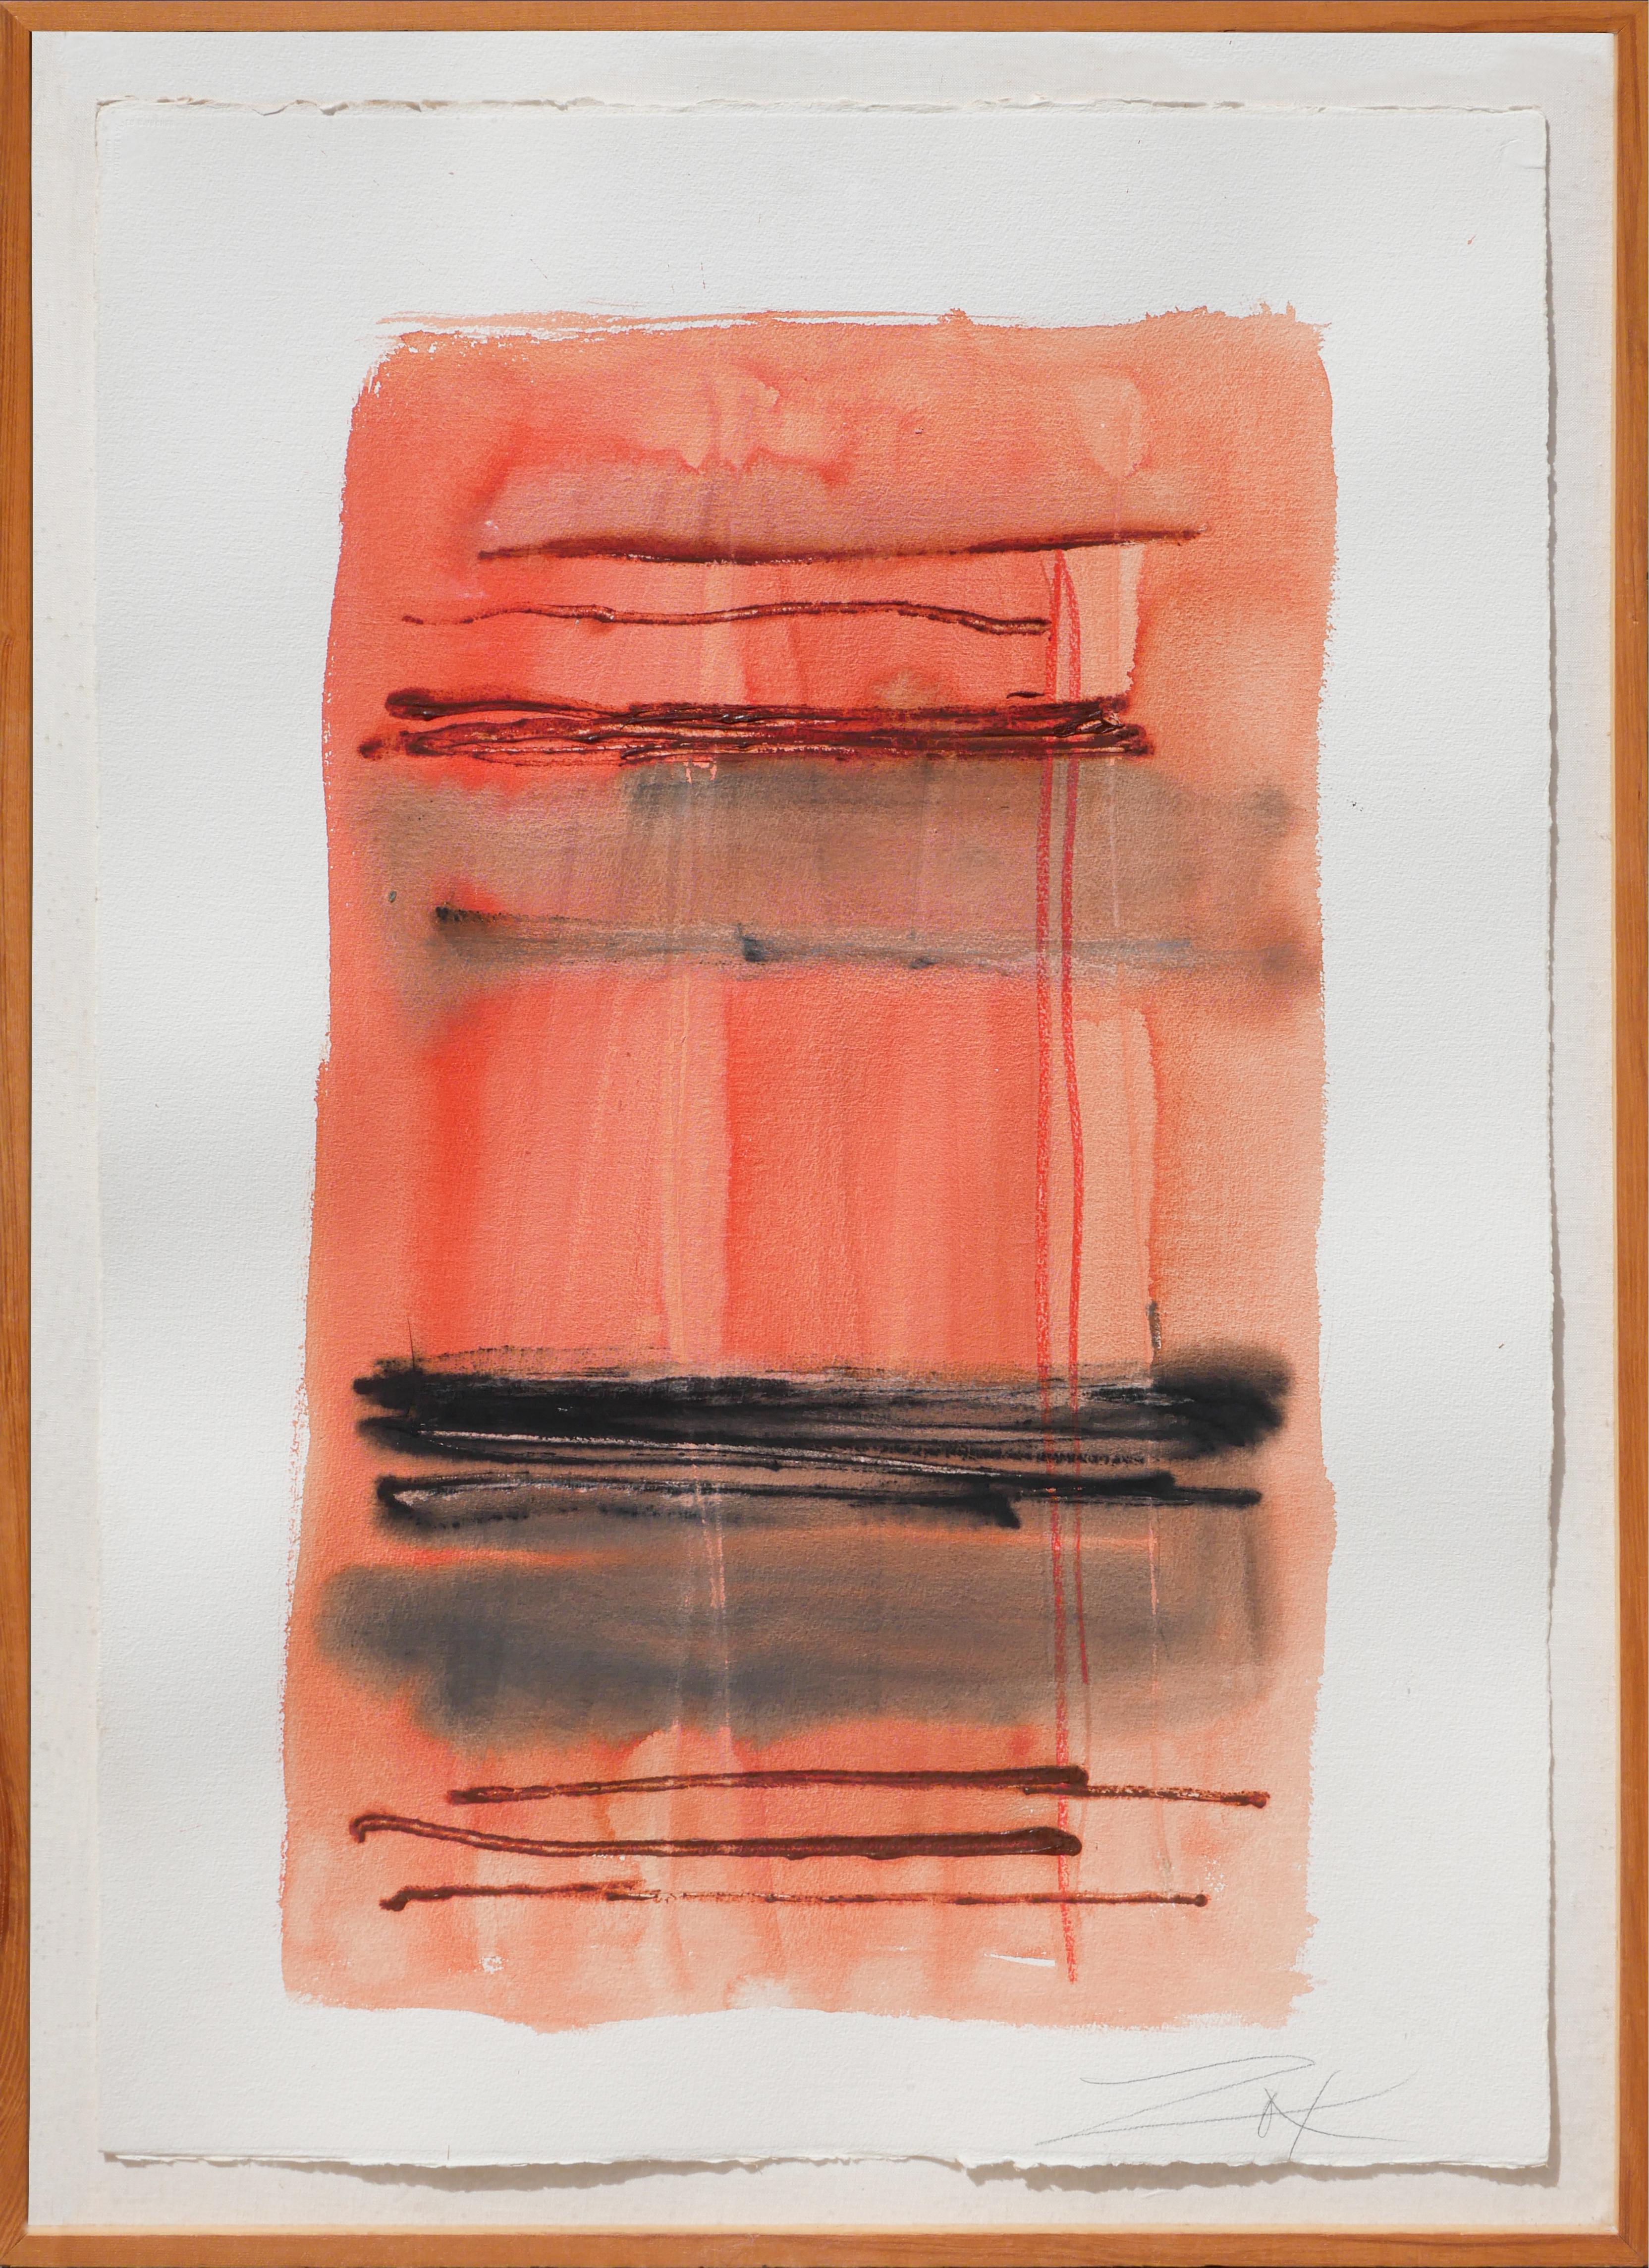 Larry Zox Abstract Painting - "Untitled" Pastel Orange-Toned Abstract Watercolor Painting